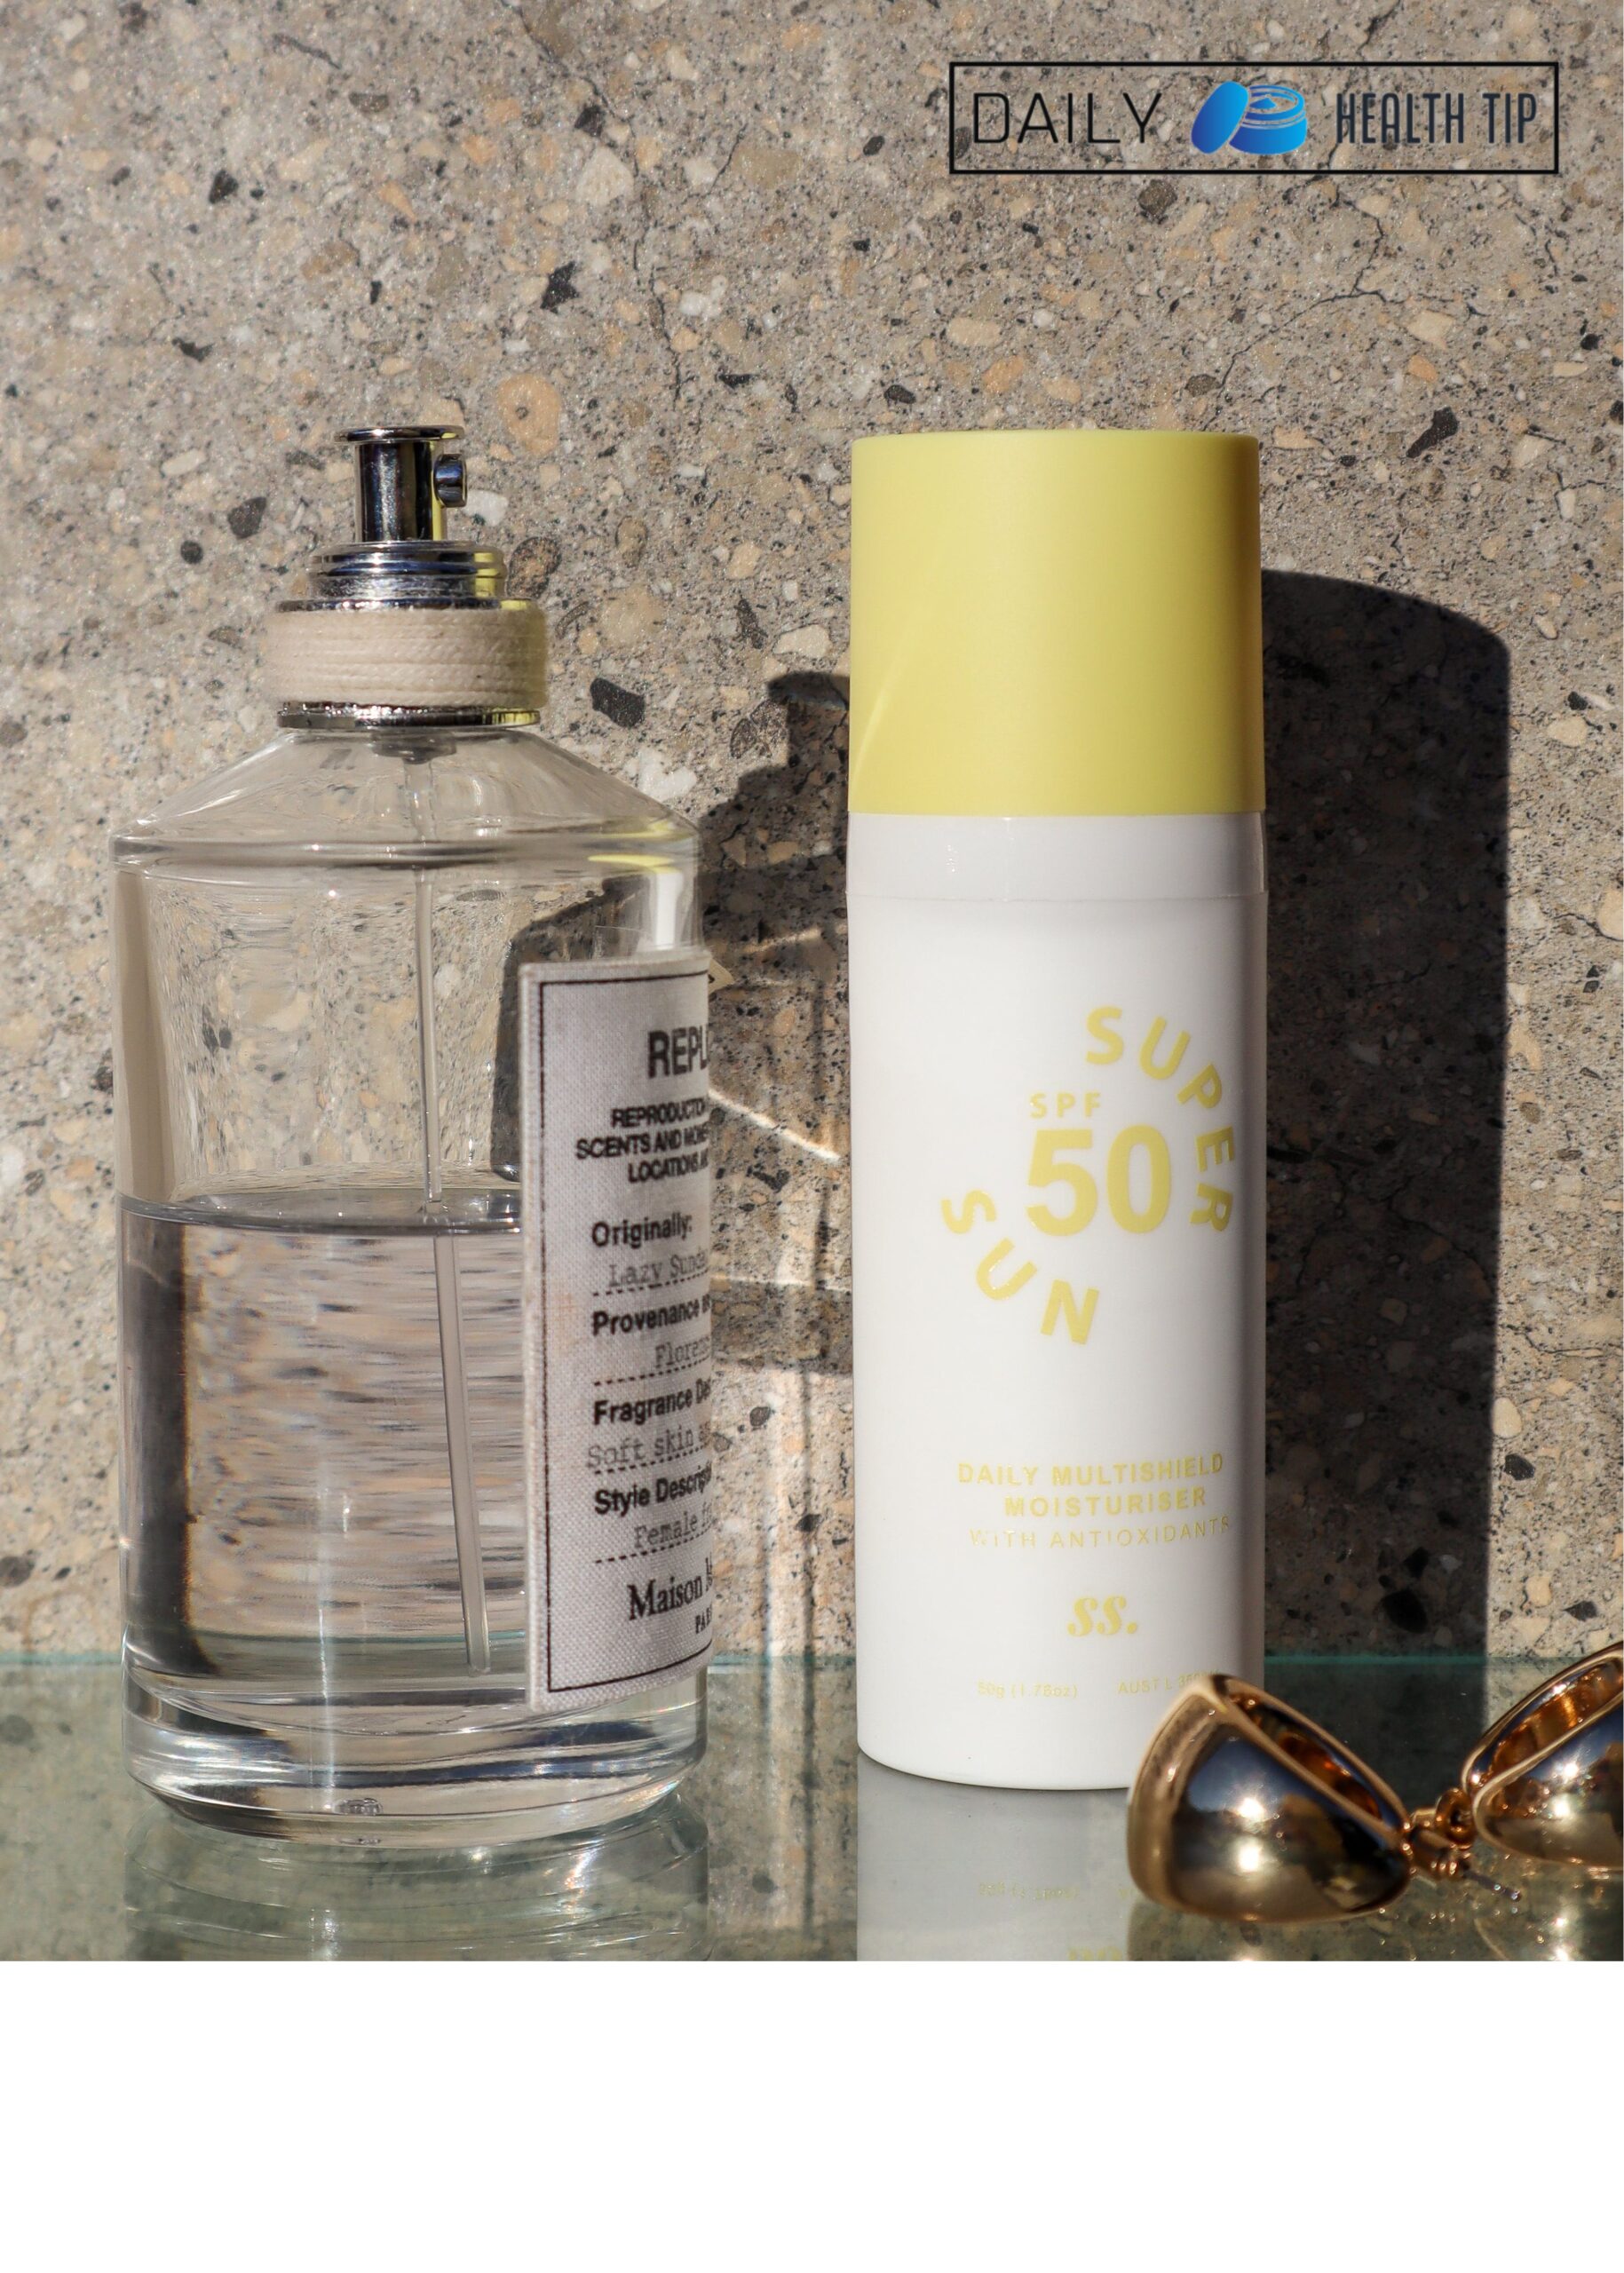 "Sunscreen 101:Everything You Need to Know for Optimal Skin Health